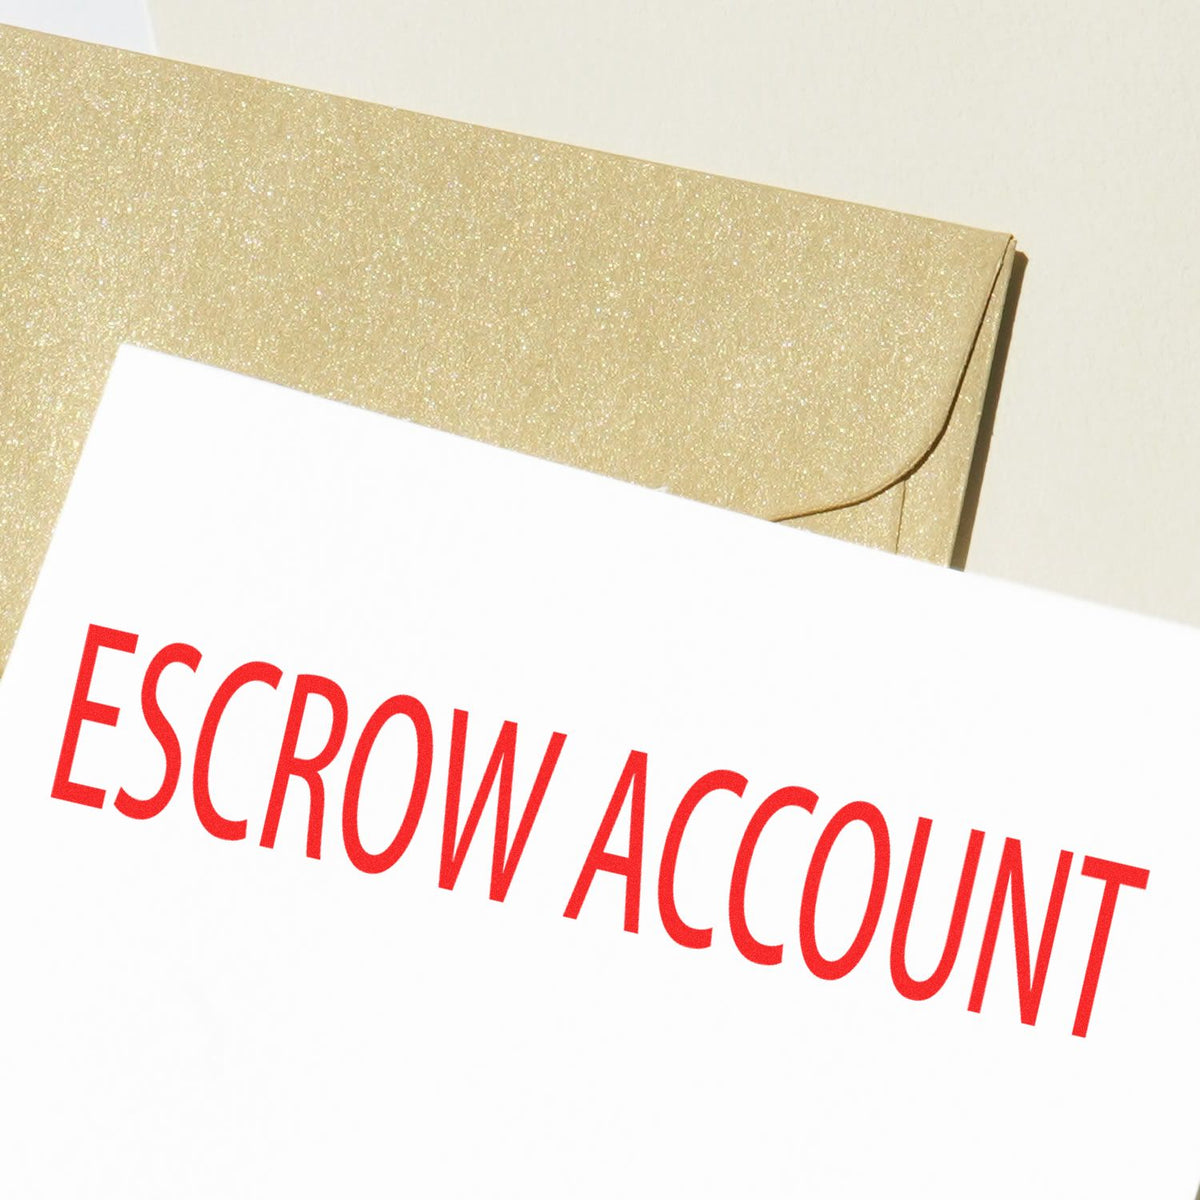 Self-Inking Escrow Account Stamp In Use Photo